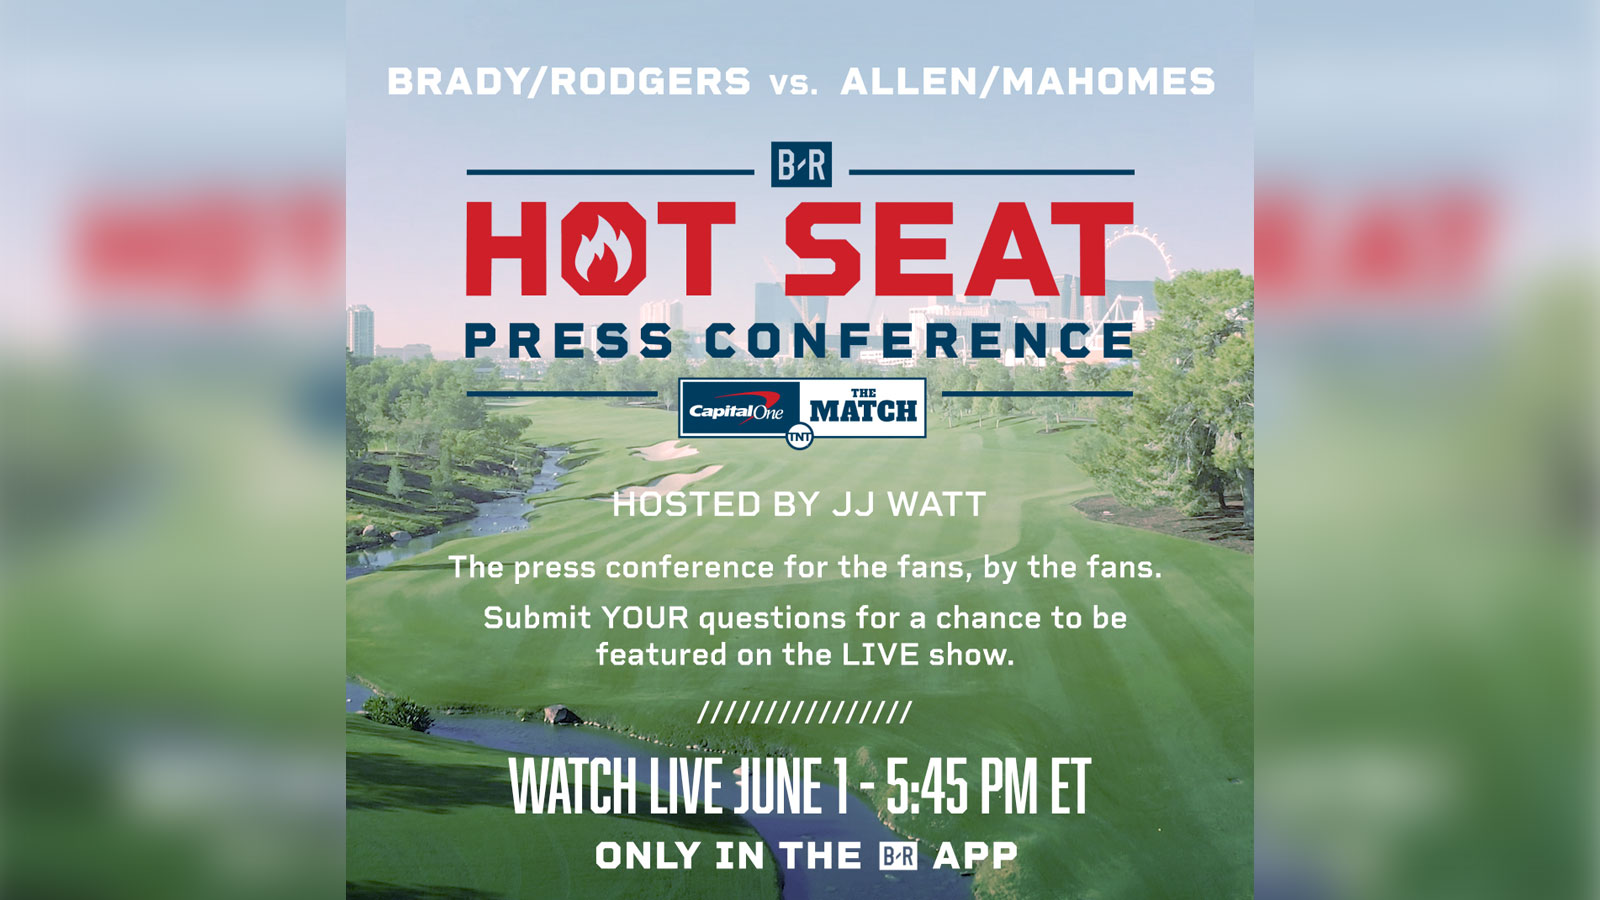 Turner Sports Presentation of Capital Ones The Match to Include B/R App Live Stream Press Conference with NFL Icons Tom Brady, Aaron Rodgers, Patrick Mahomes and Josh Allen Beginning June 1, at